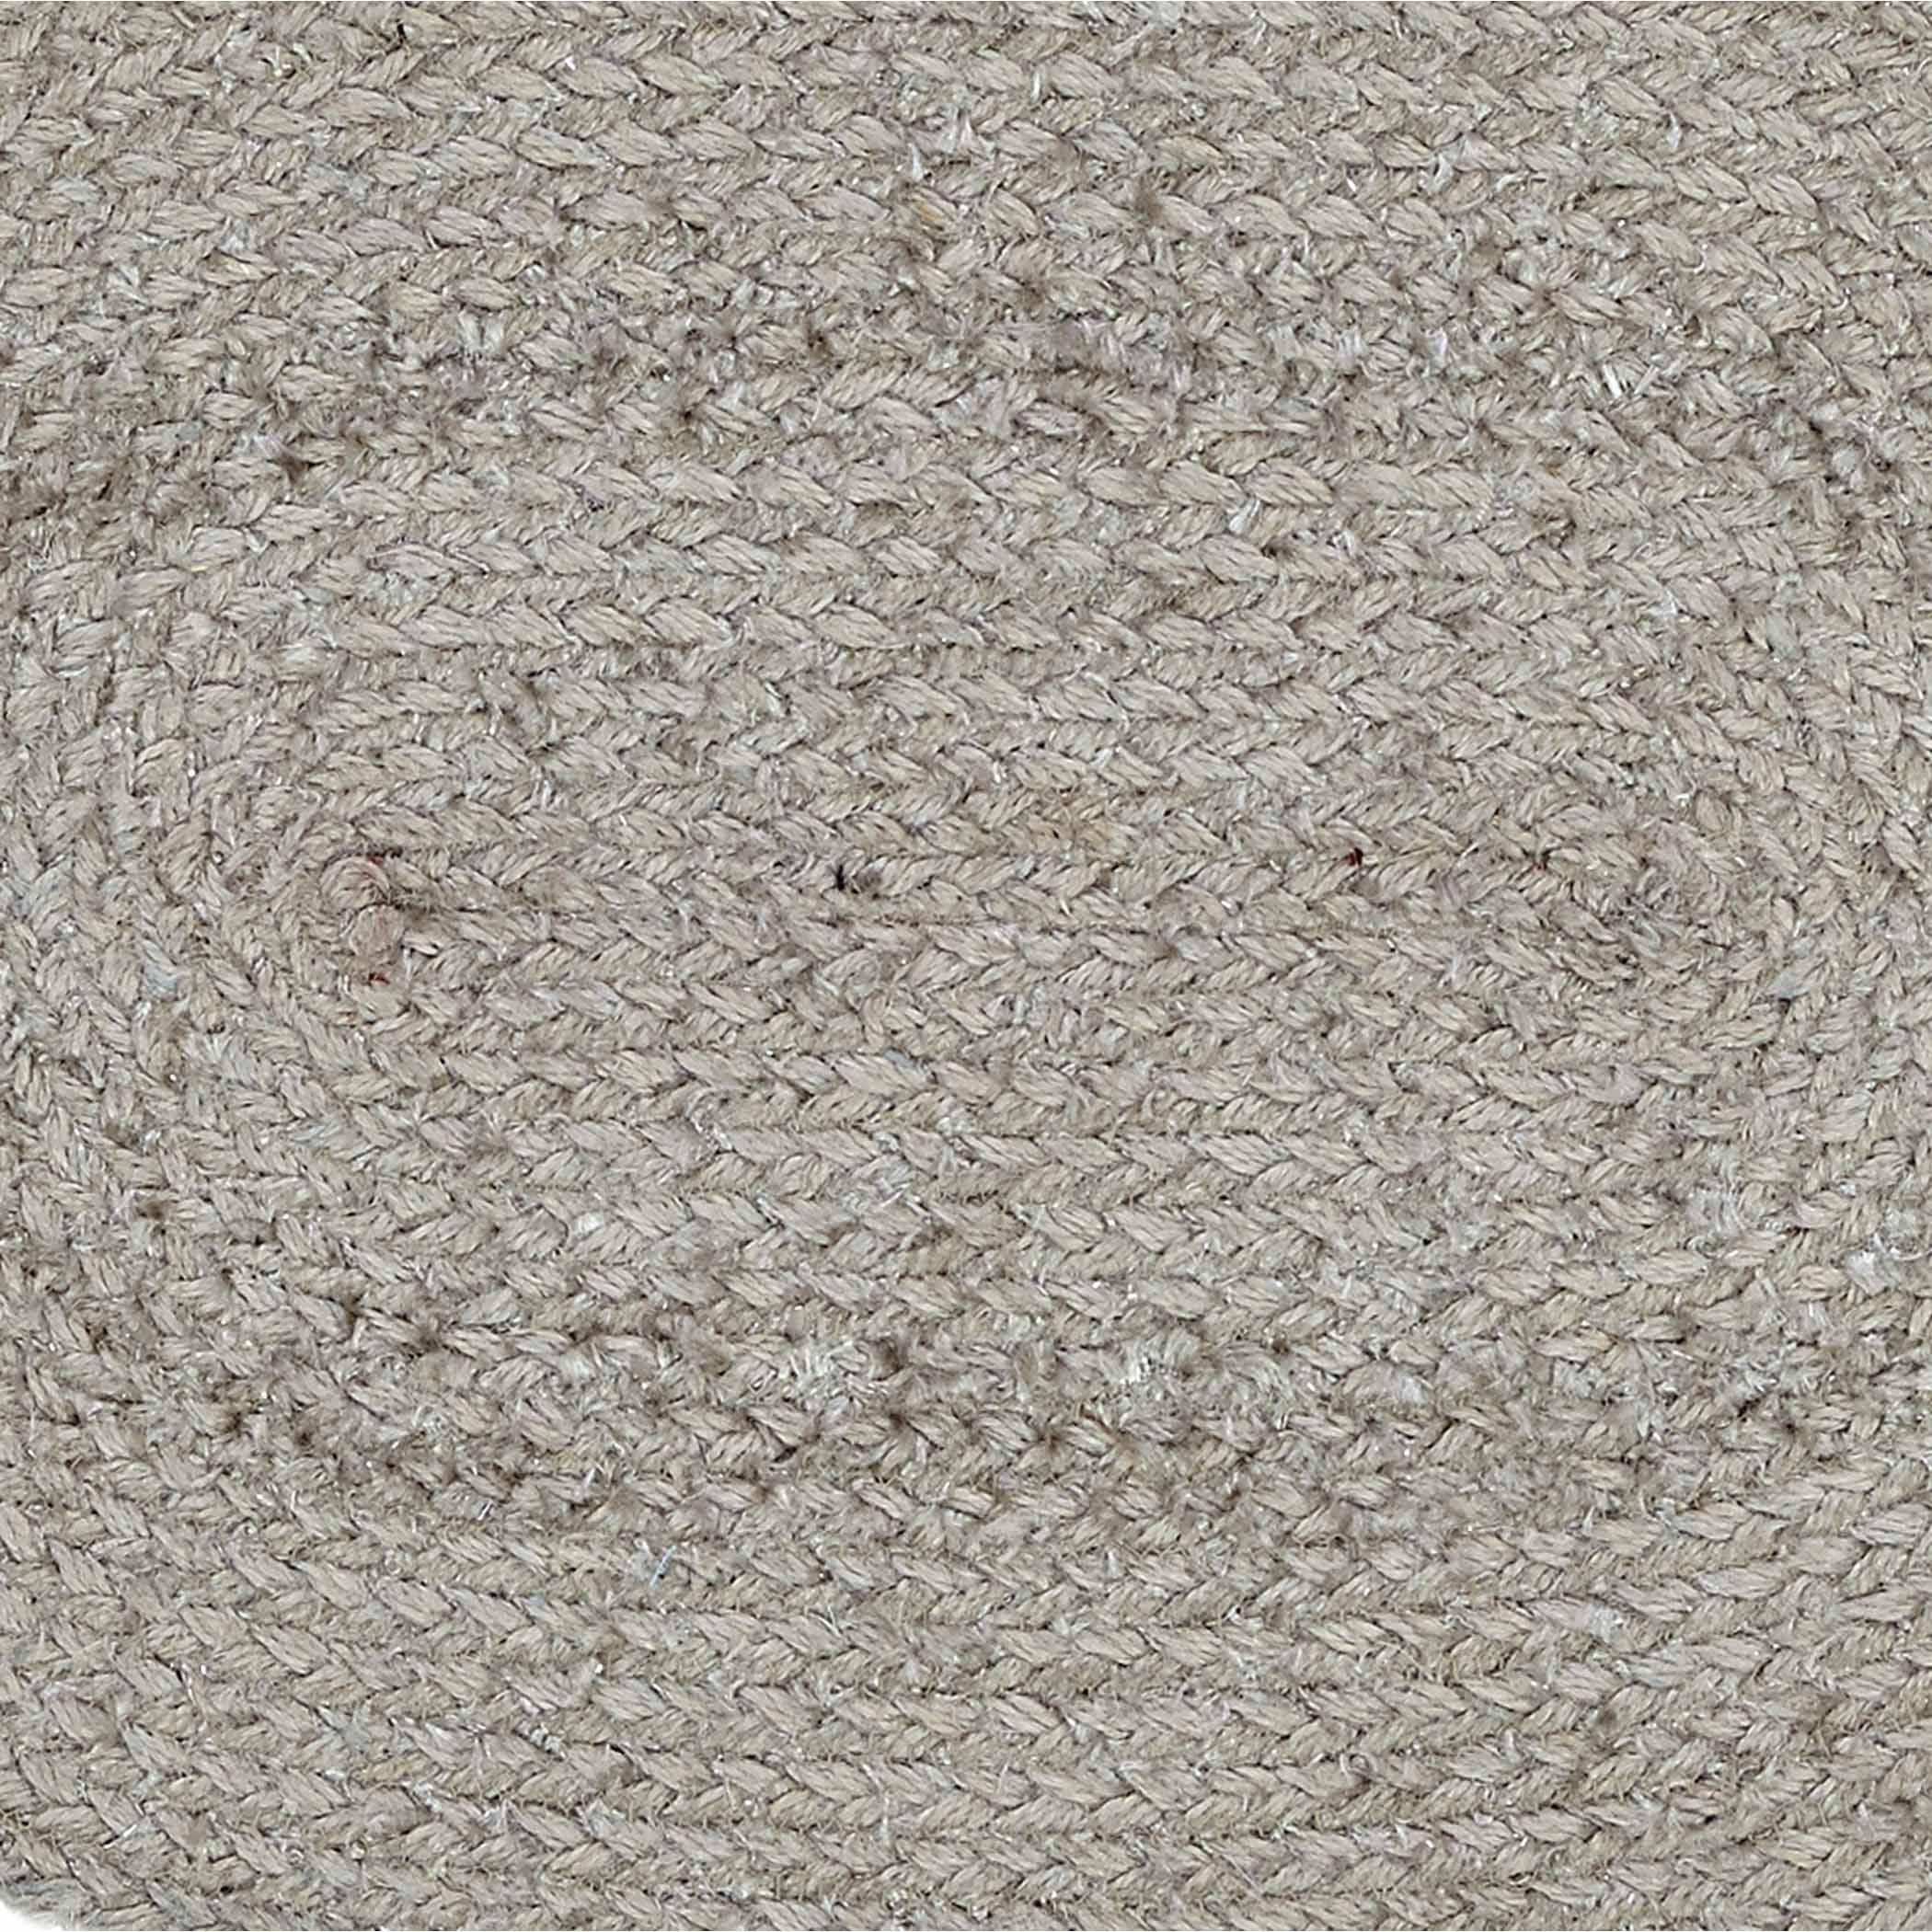 Dyani Silver Jute Braided Placemat Set of 6 VHC Brands - The Fox Decor